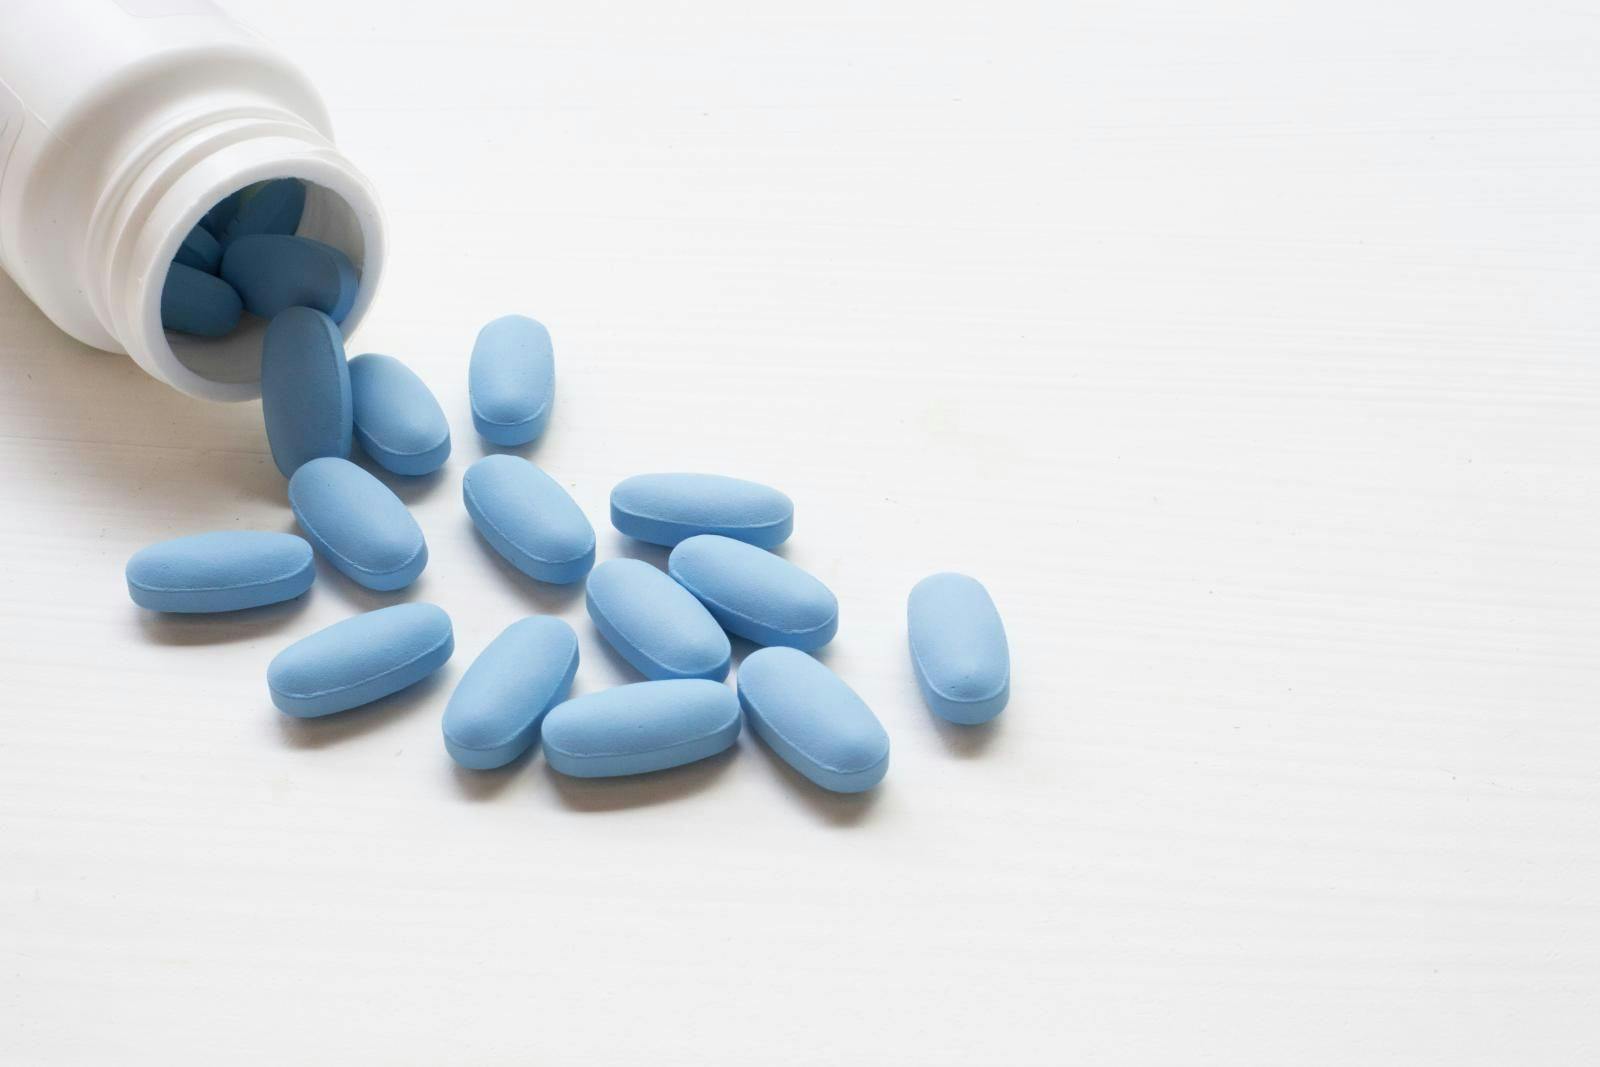 Trending News Today: New PrEP Approach Reduces Number of Pills Needed